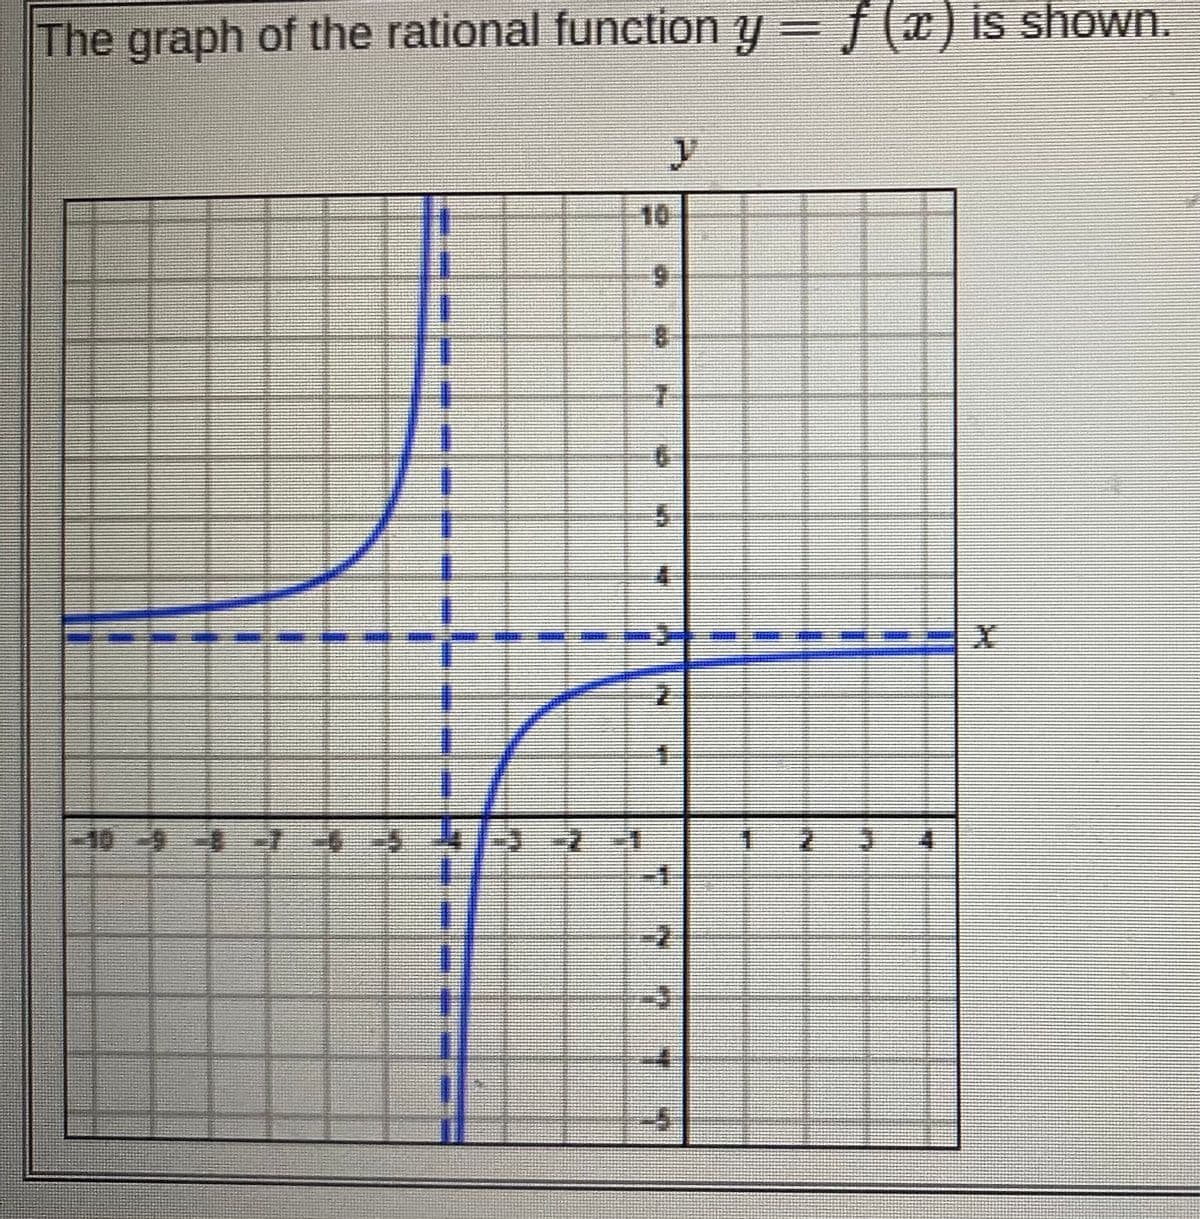 The graph of the rational function y = f(x) is shown.
UMOYS sI ()/
10
6.
109
